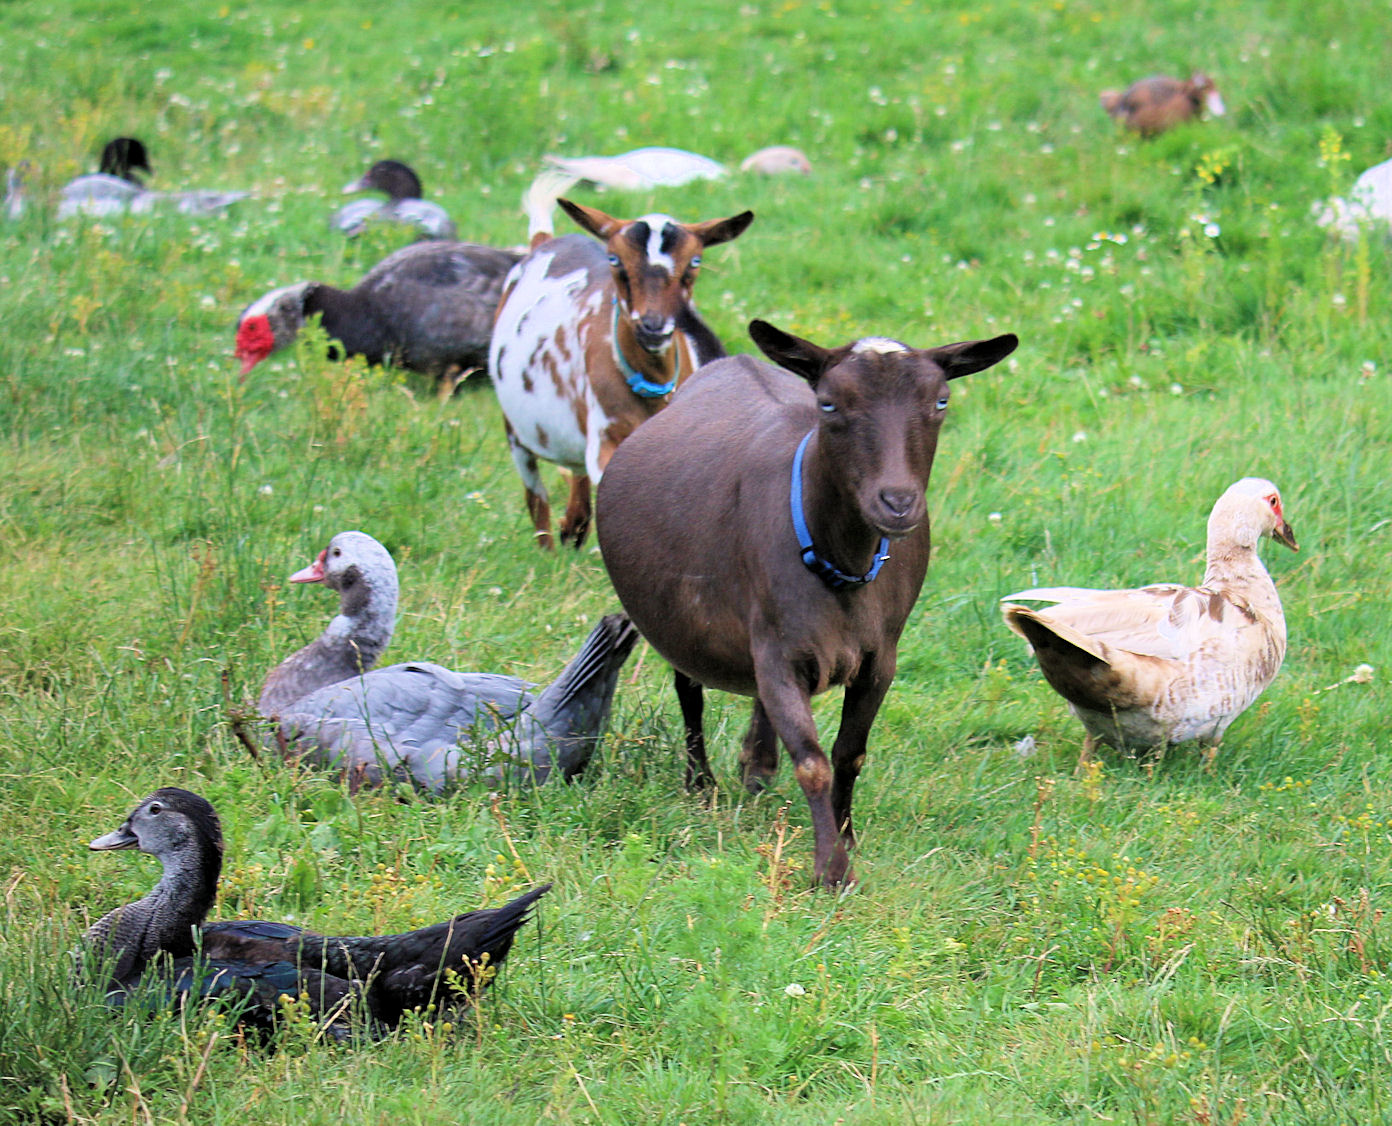 ducks-and-goats